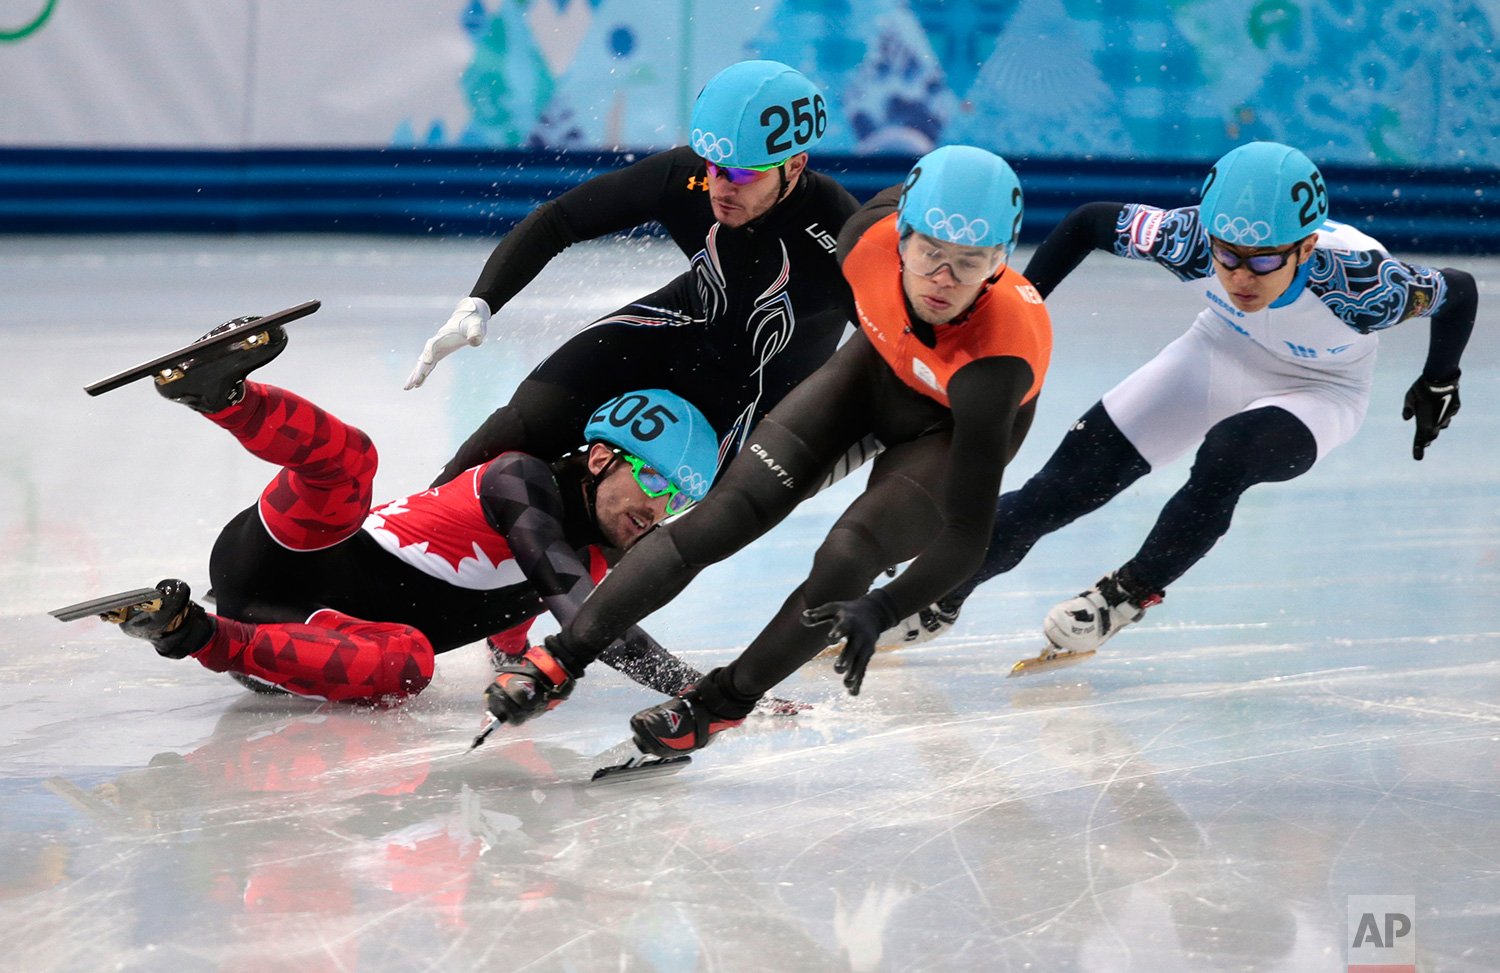  Charles Hamelin of Canada, left, crashes out with Eduardo Alvarez of the United States, second from left, as they compete with Sjinkie Knegt of Netherlands, second from right, and Victor An of Russia in a men's 1000m short track speedskating quarter